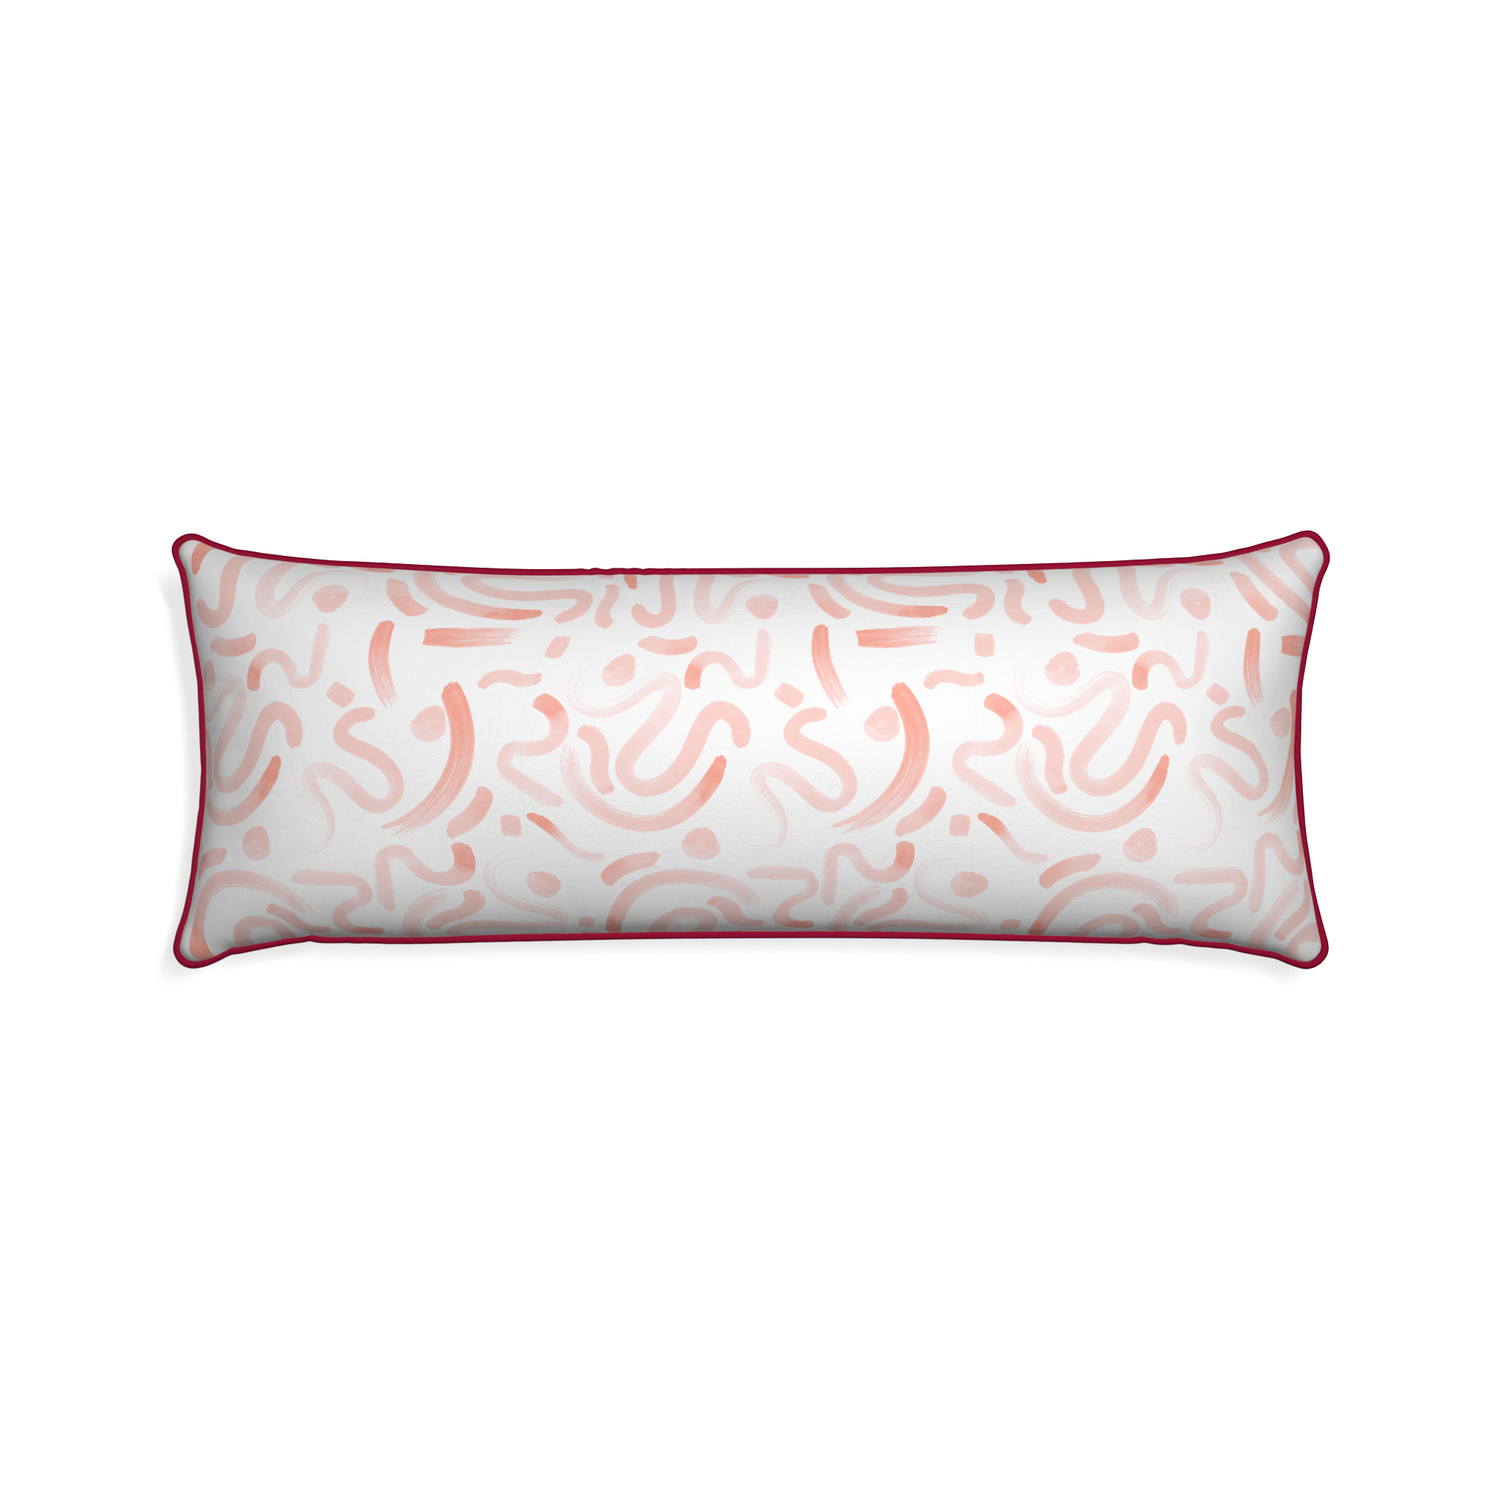 Xl-lumbar hockney pink custom pillow with raspberry piping on white background